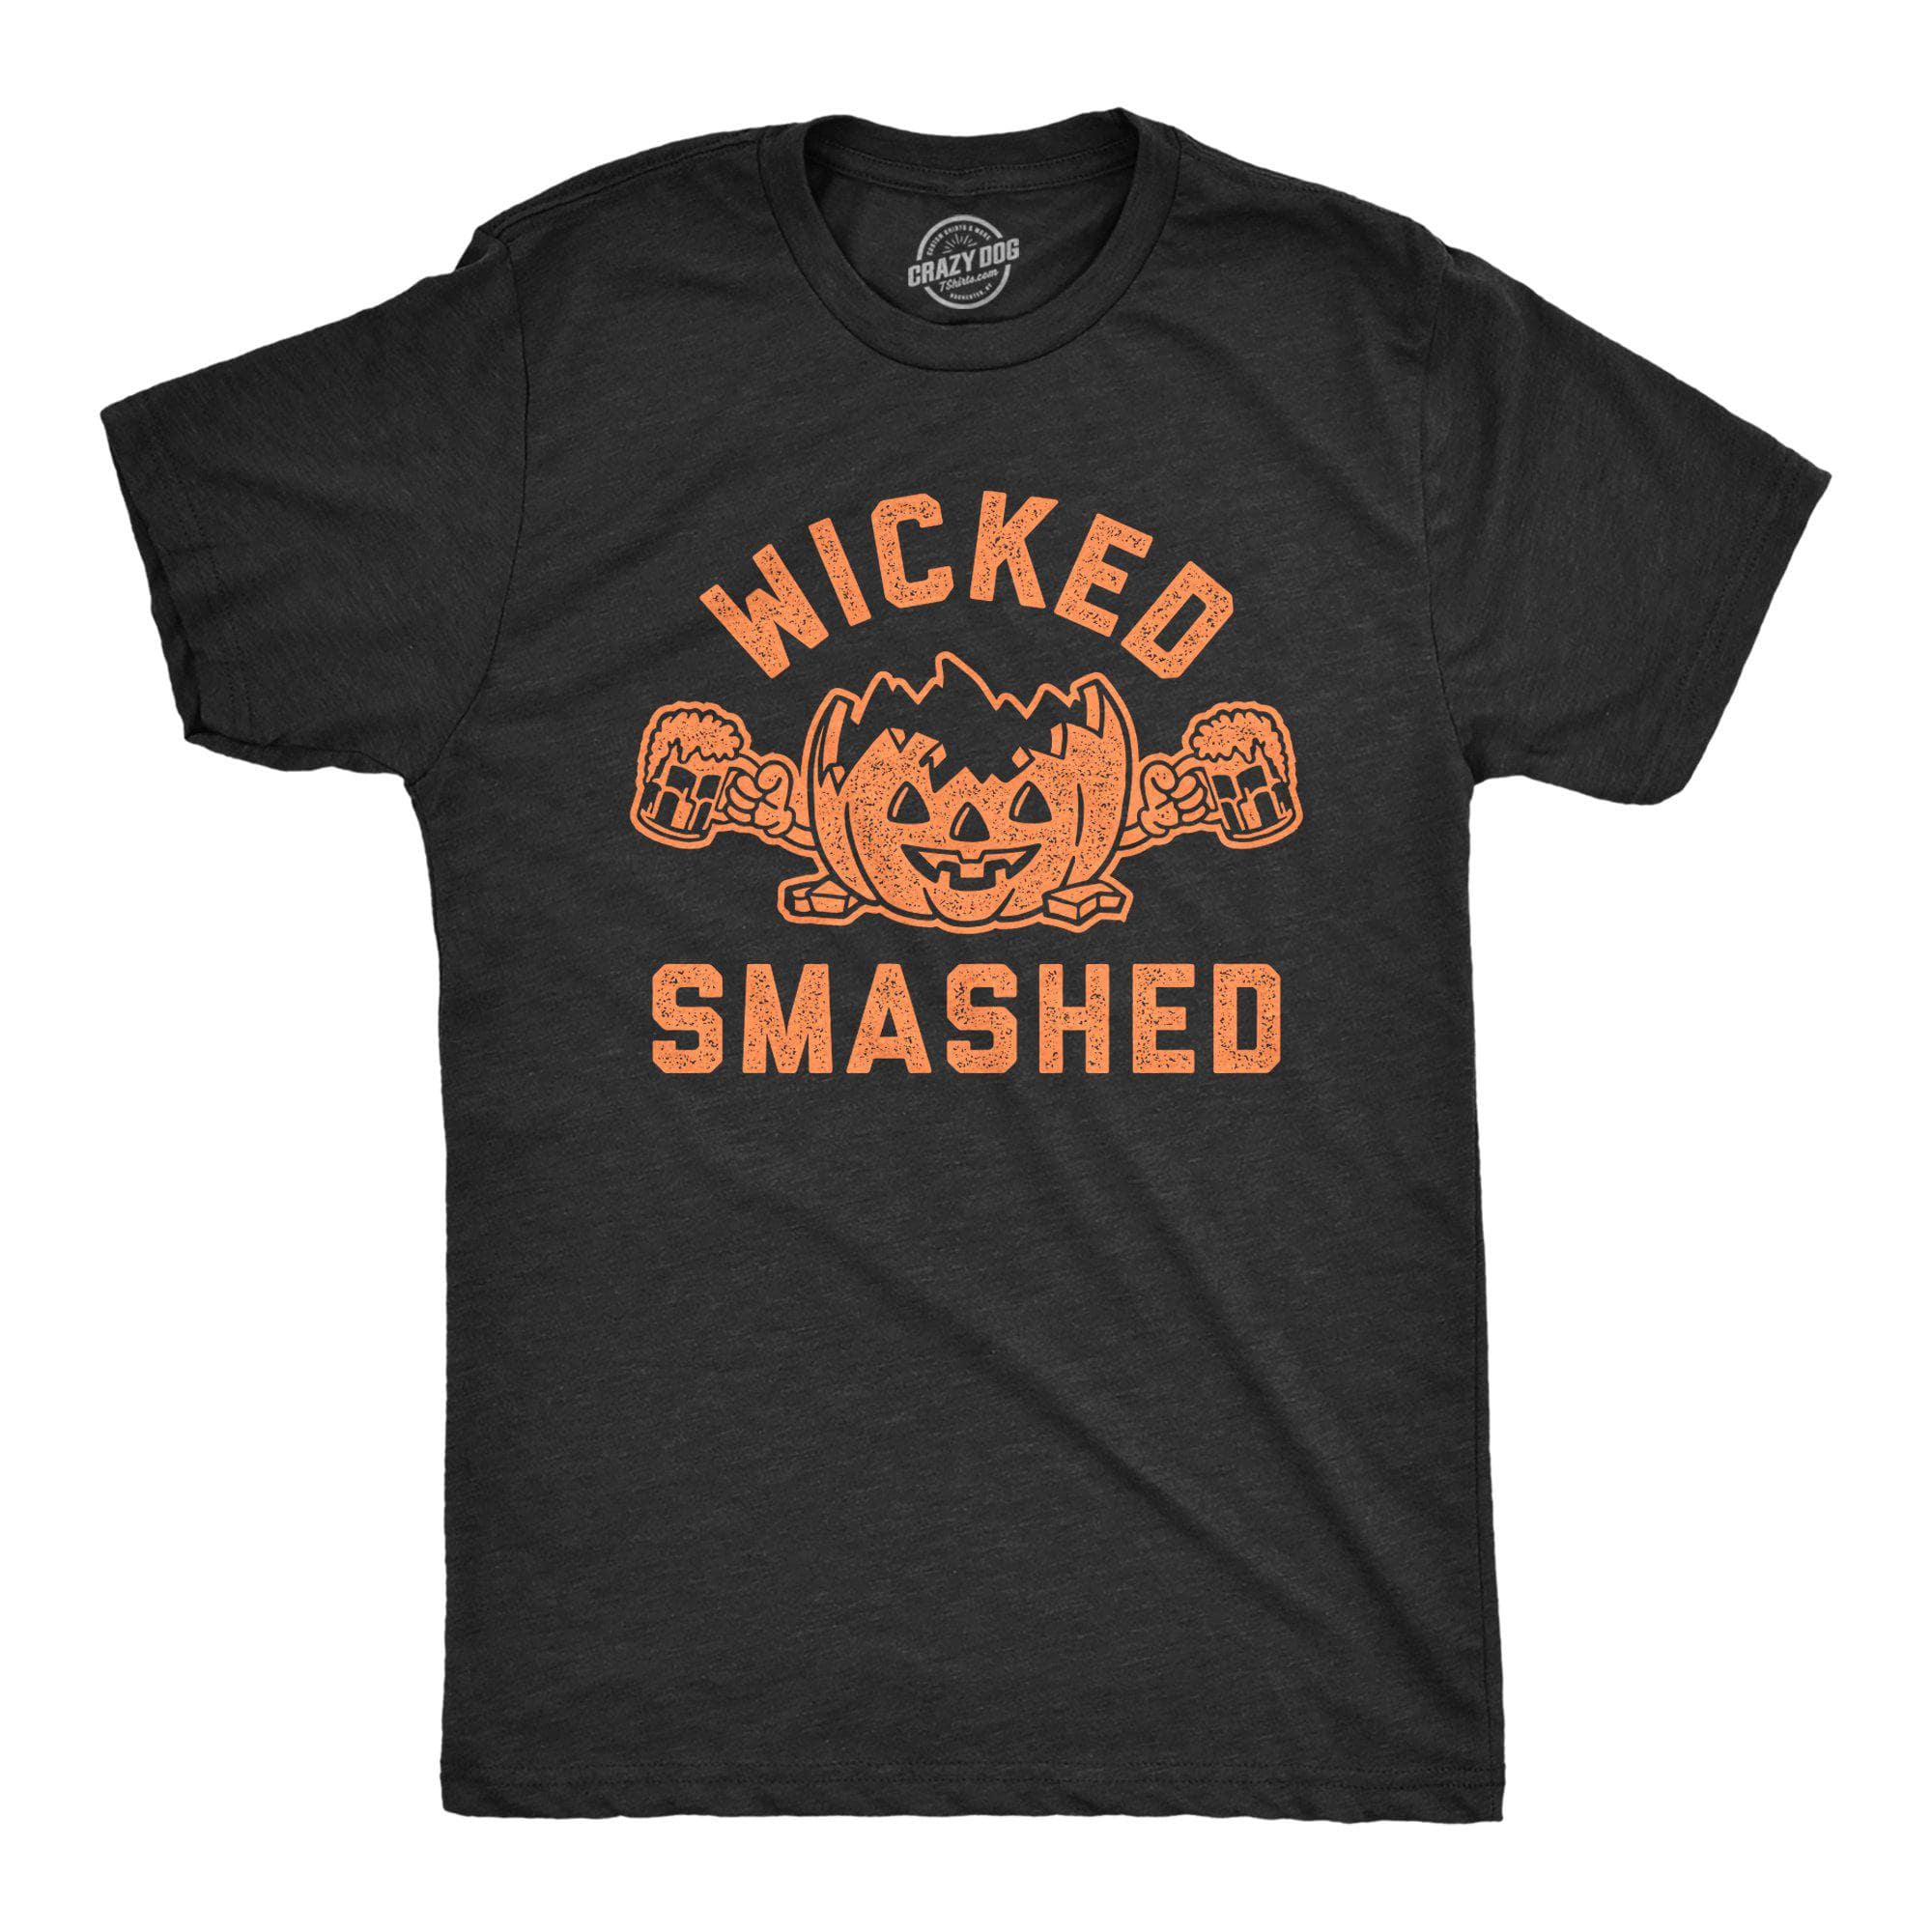 Wicked Smashed Men's Tshirt - Crazy Dog T-Shirts